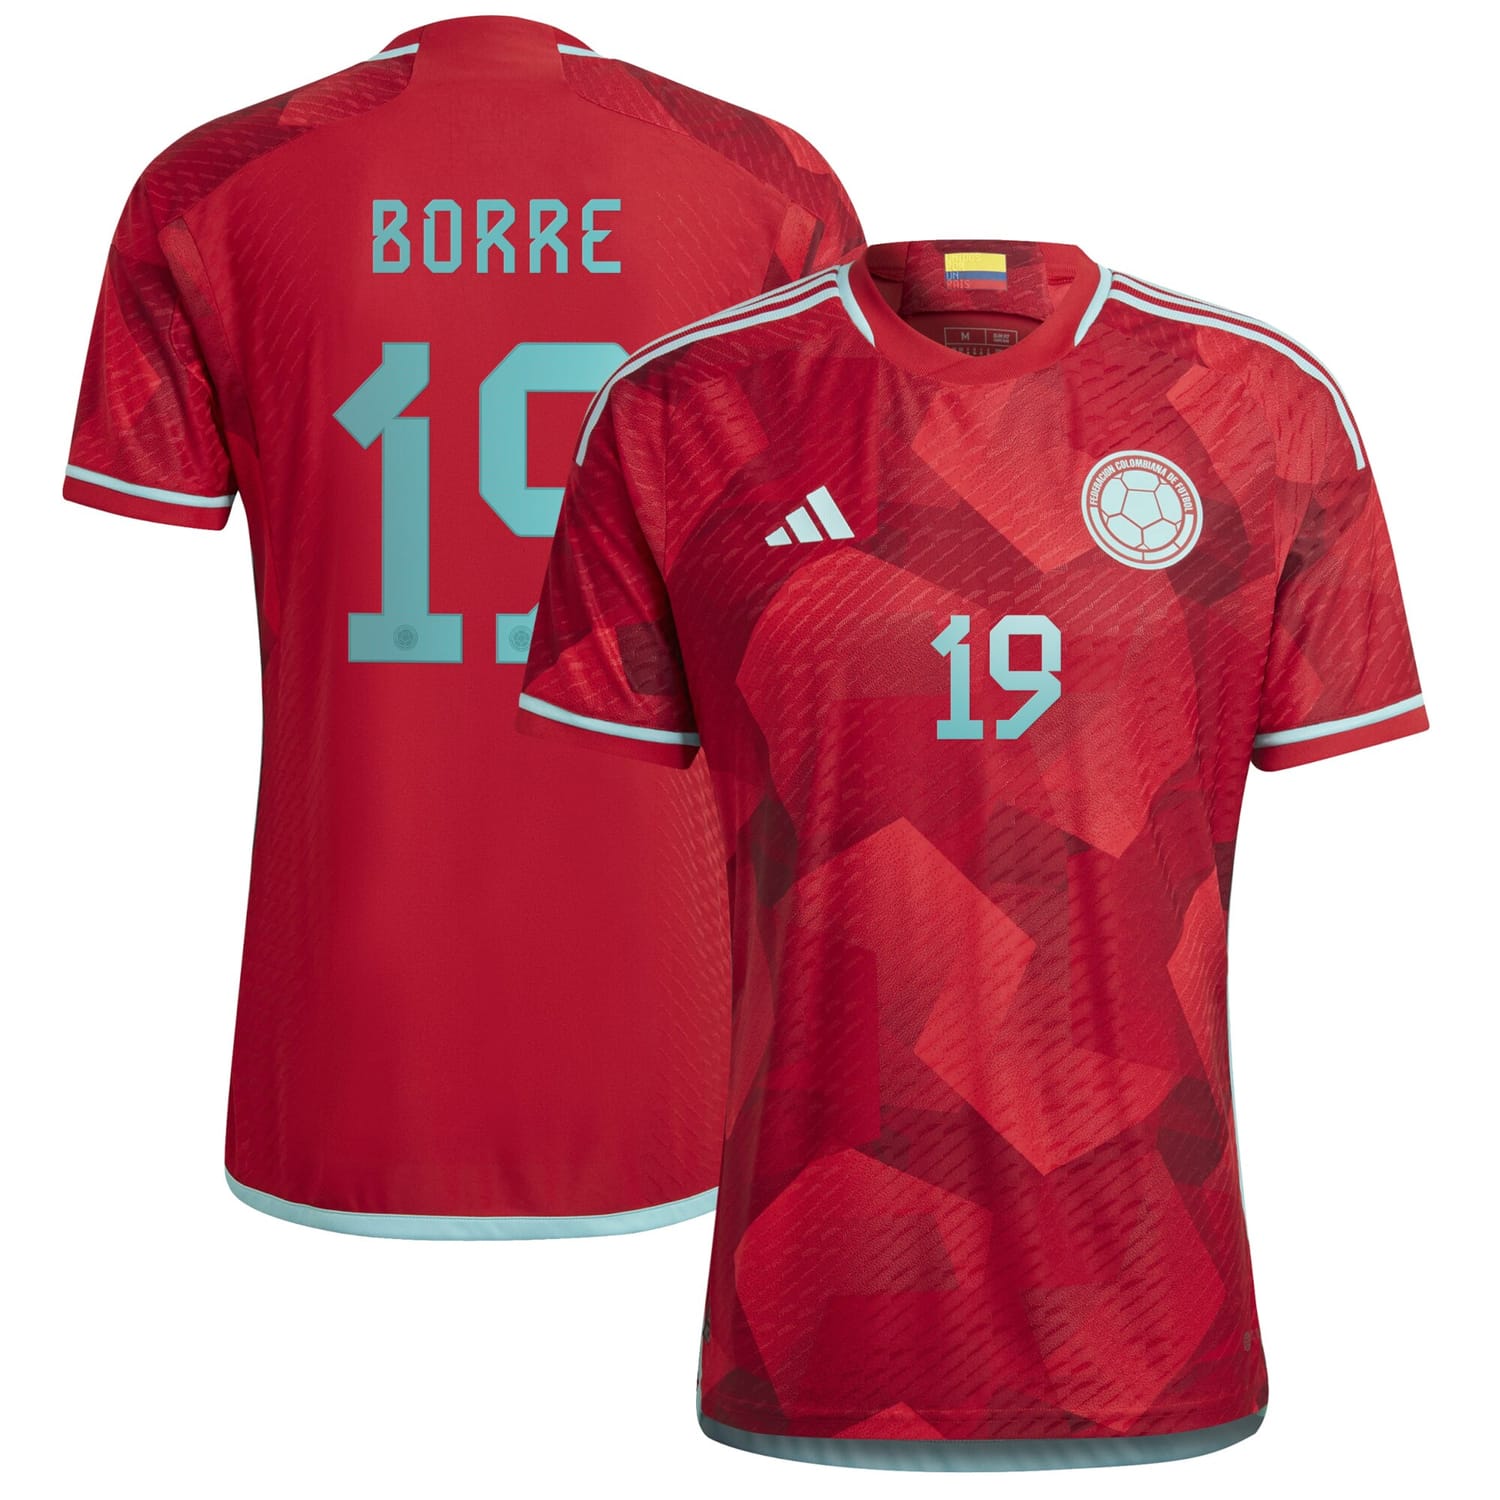 Colombia National Team Away Authentic Jersey Shirt Red 2022-23 player Rafael Borré printing for Men